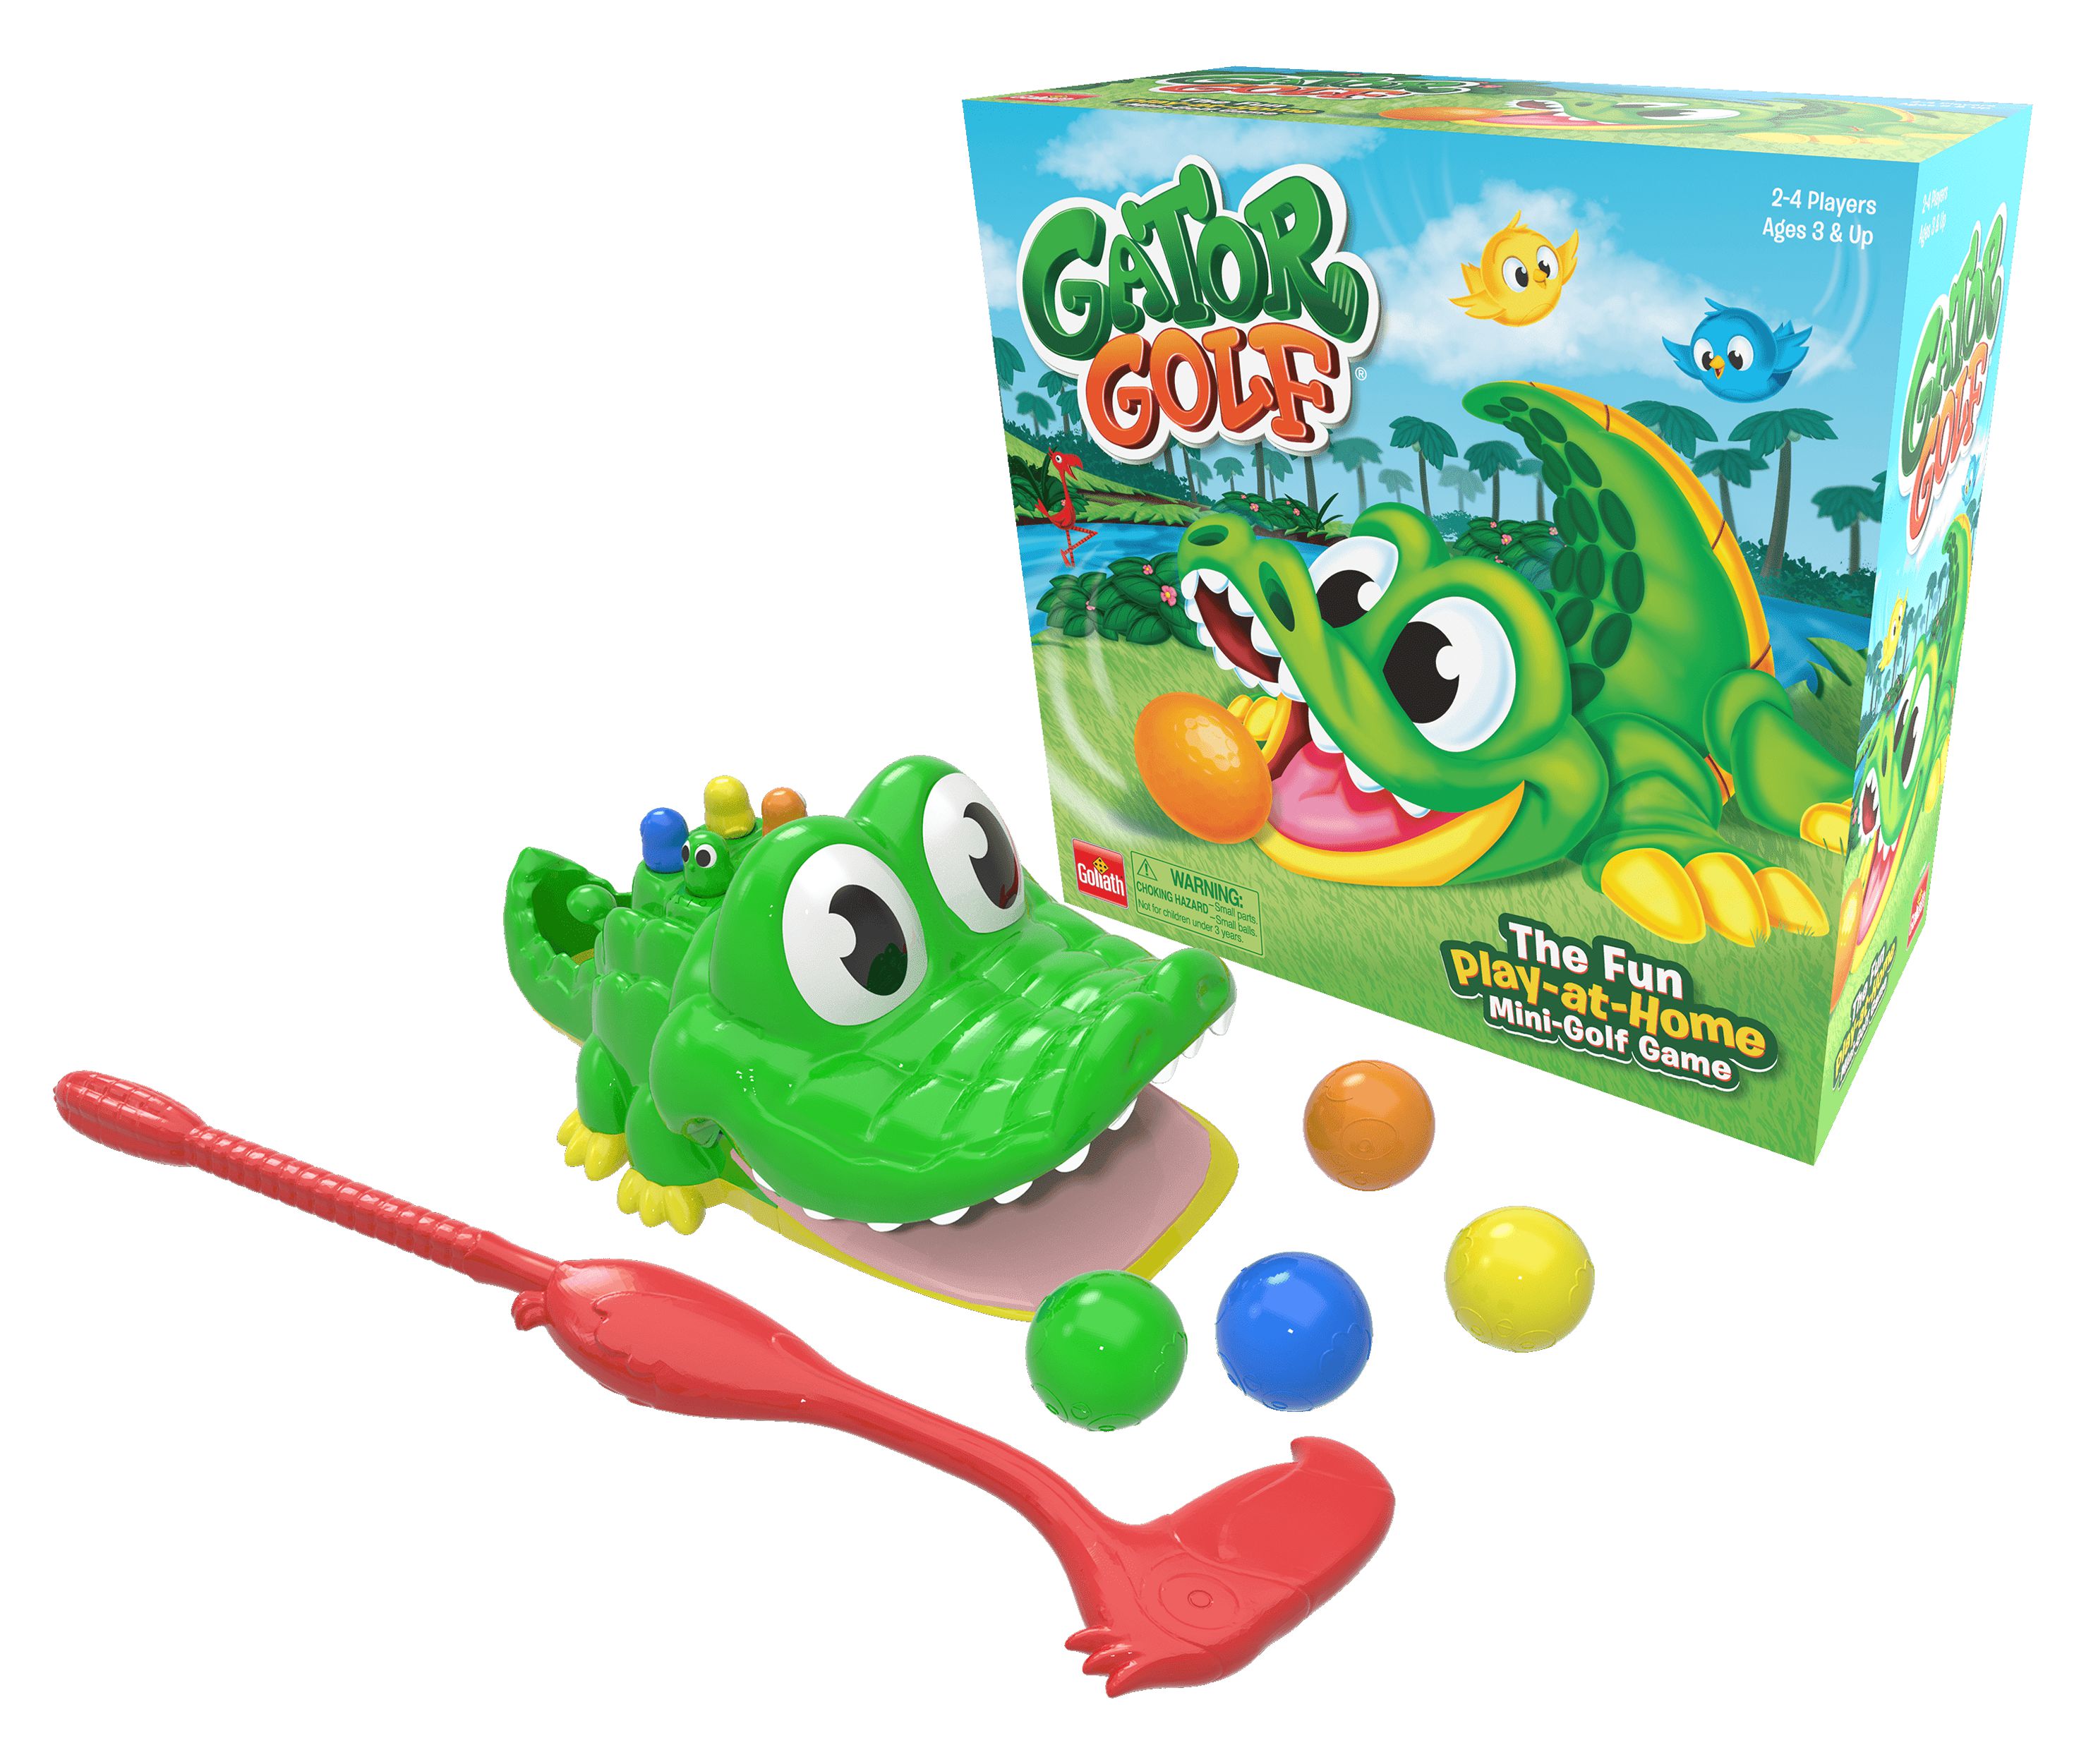 Goliath Games - Gator Golf- the Fun Play-at-Home Mini-Golf Game - image 3 of 8